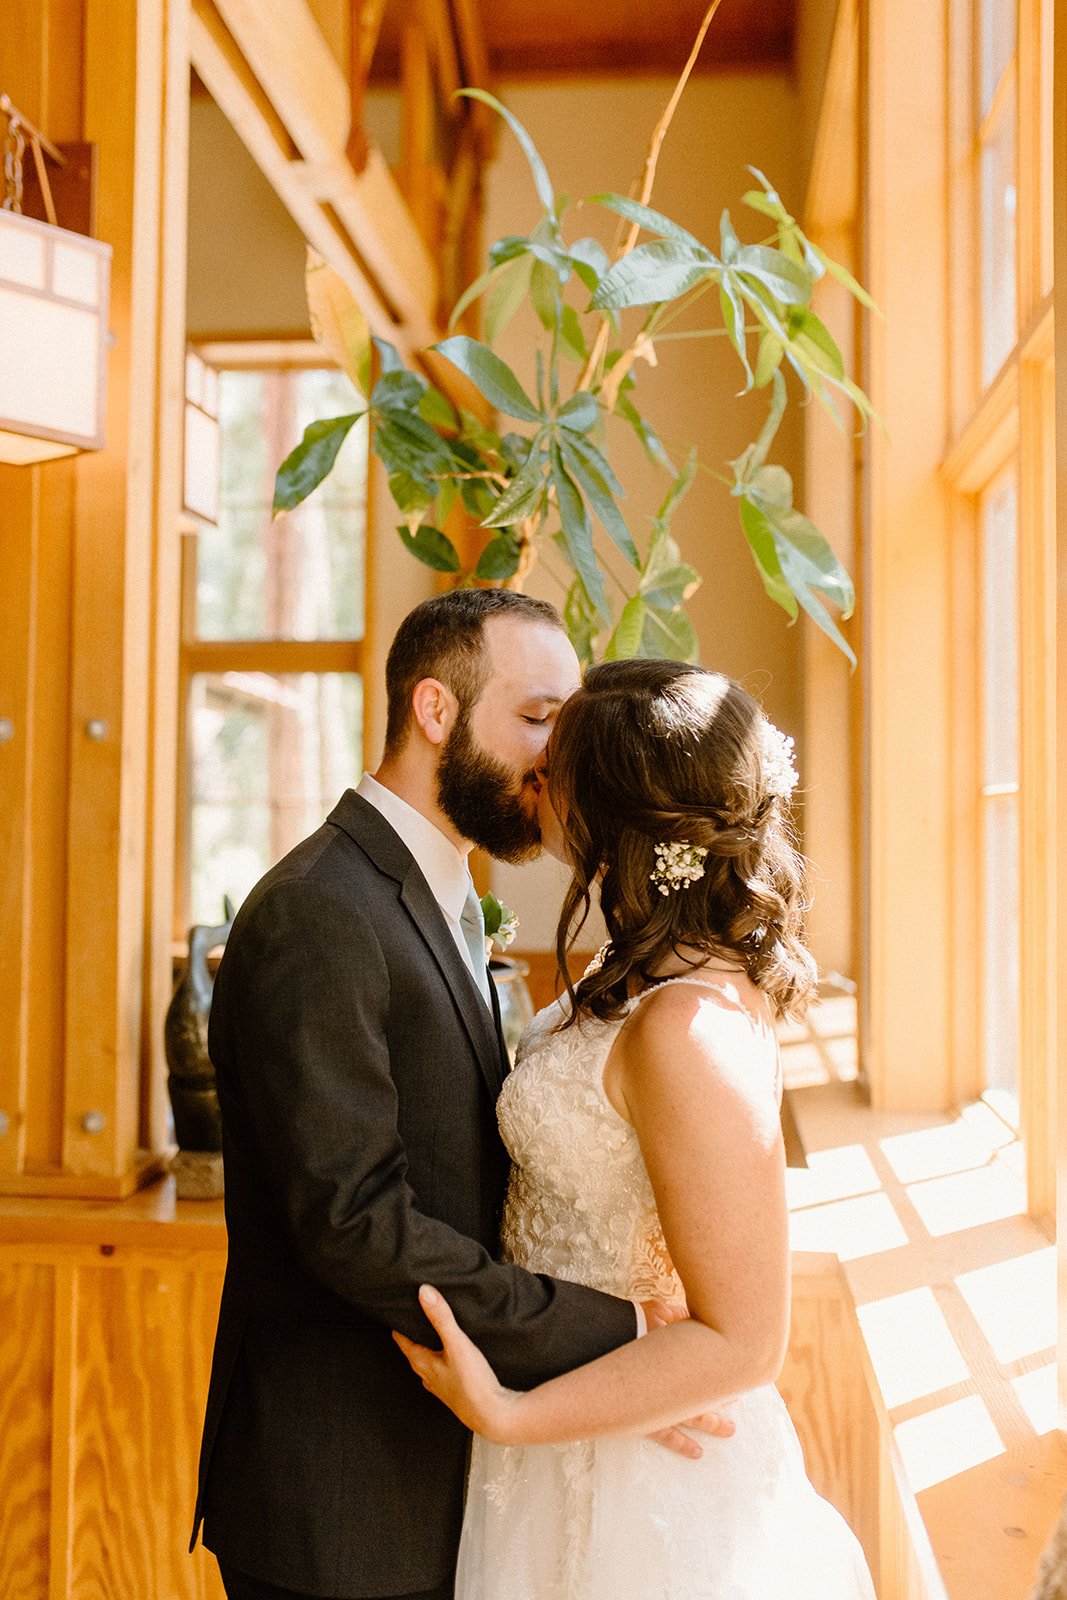 Bride and groom photos with beautiful backdrops and dreamy decor at The Sleeping Lady Resort